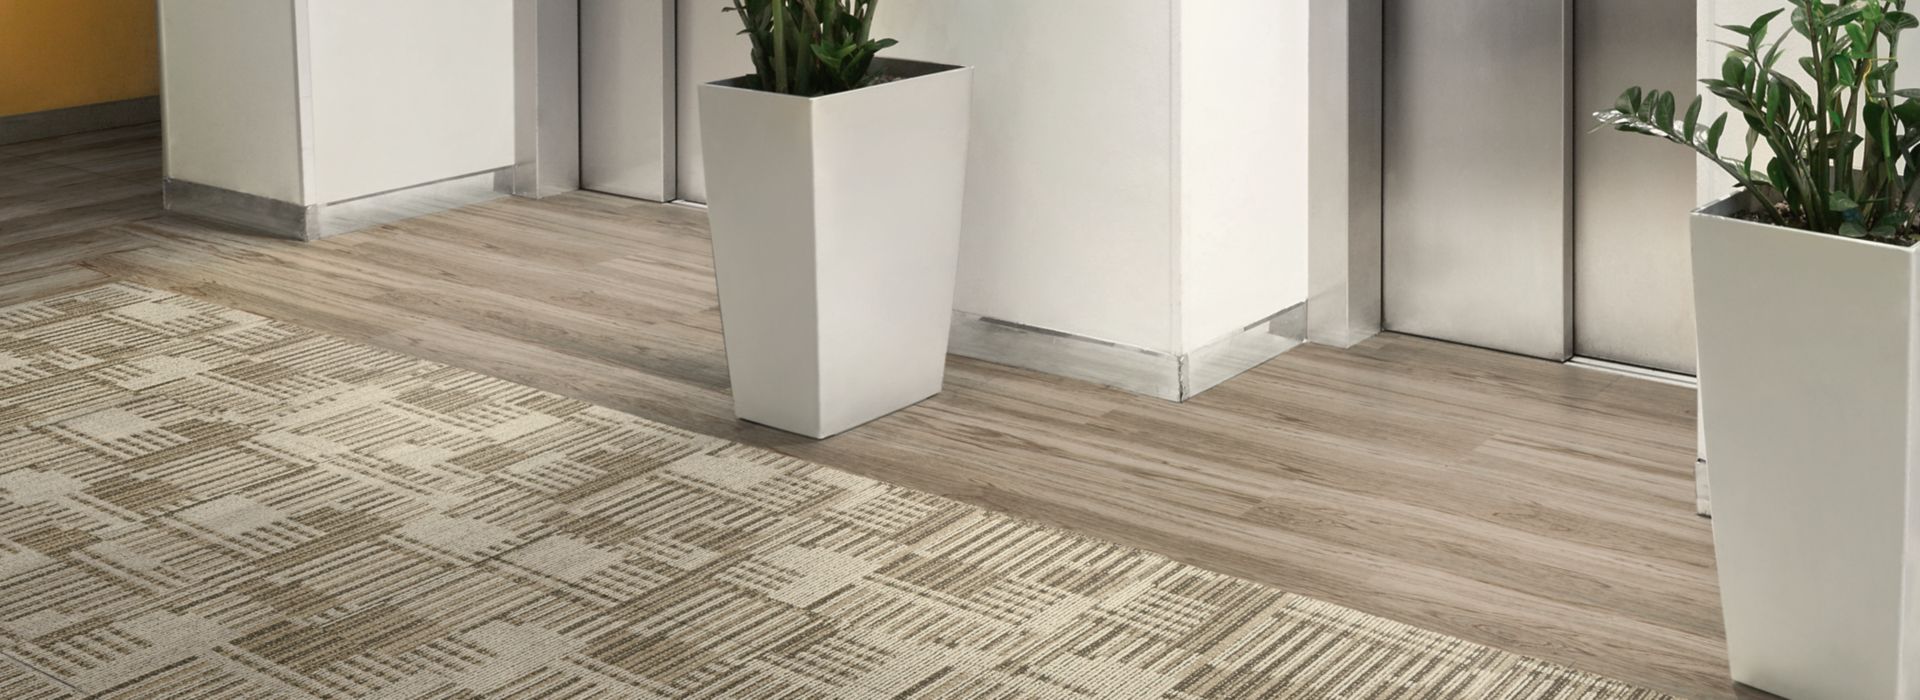 Interface Cordoba carpet tile and Natural Woodgrains LVT by elevator lobby image number 1